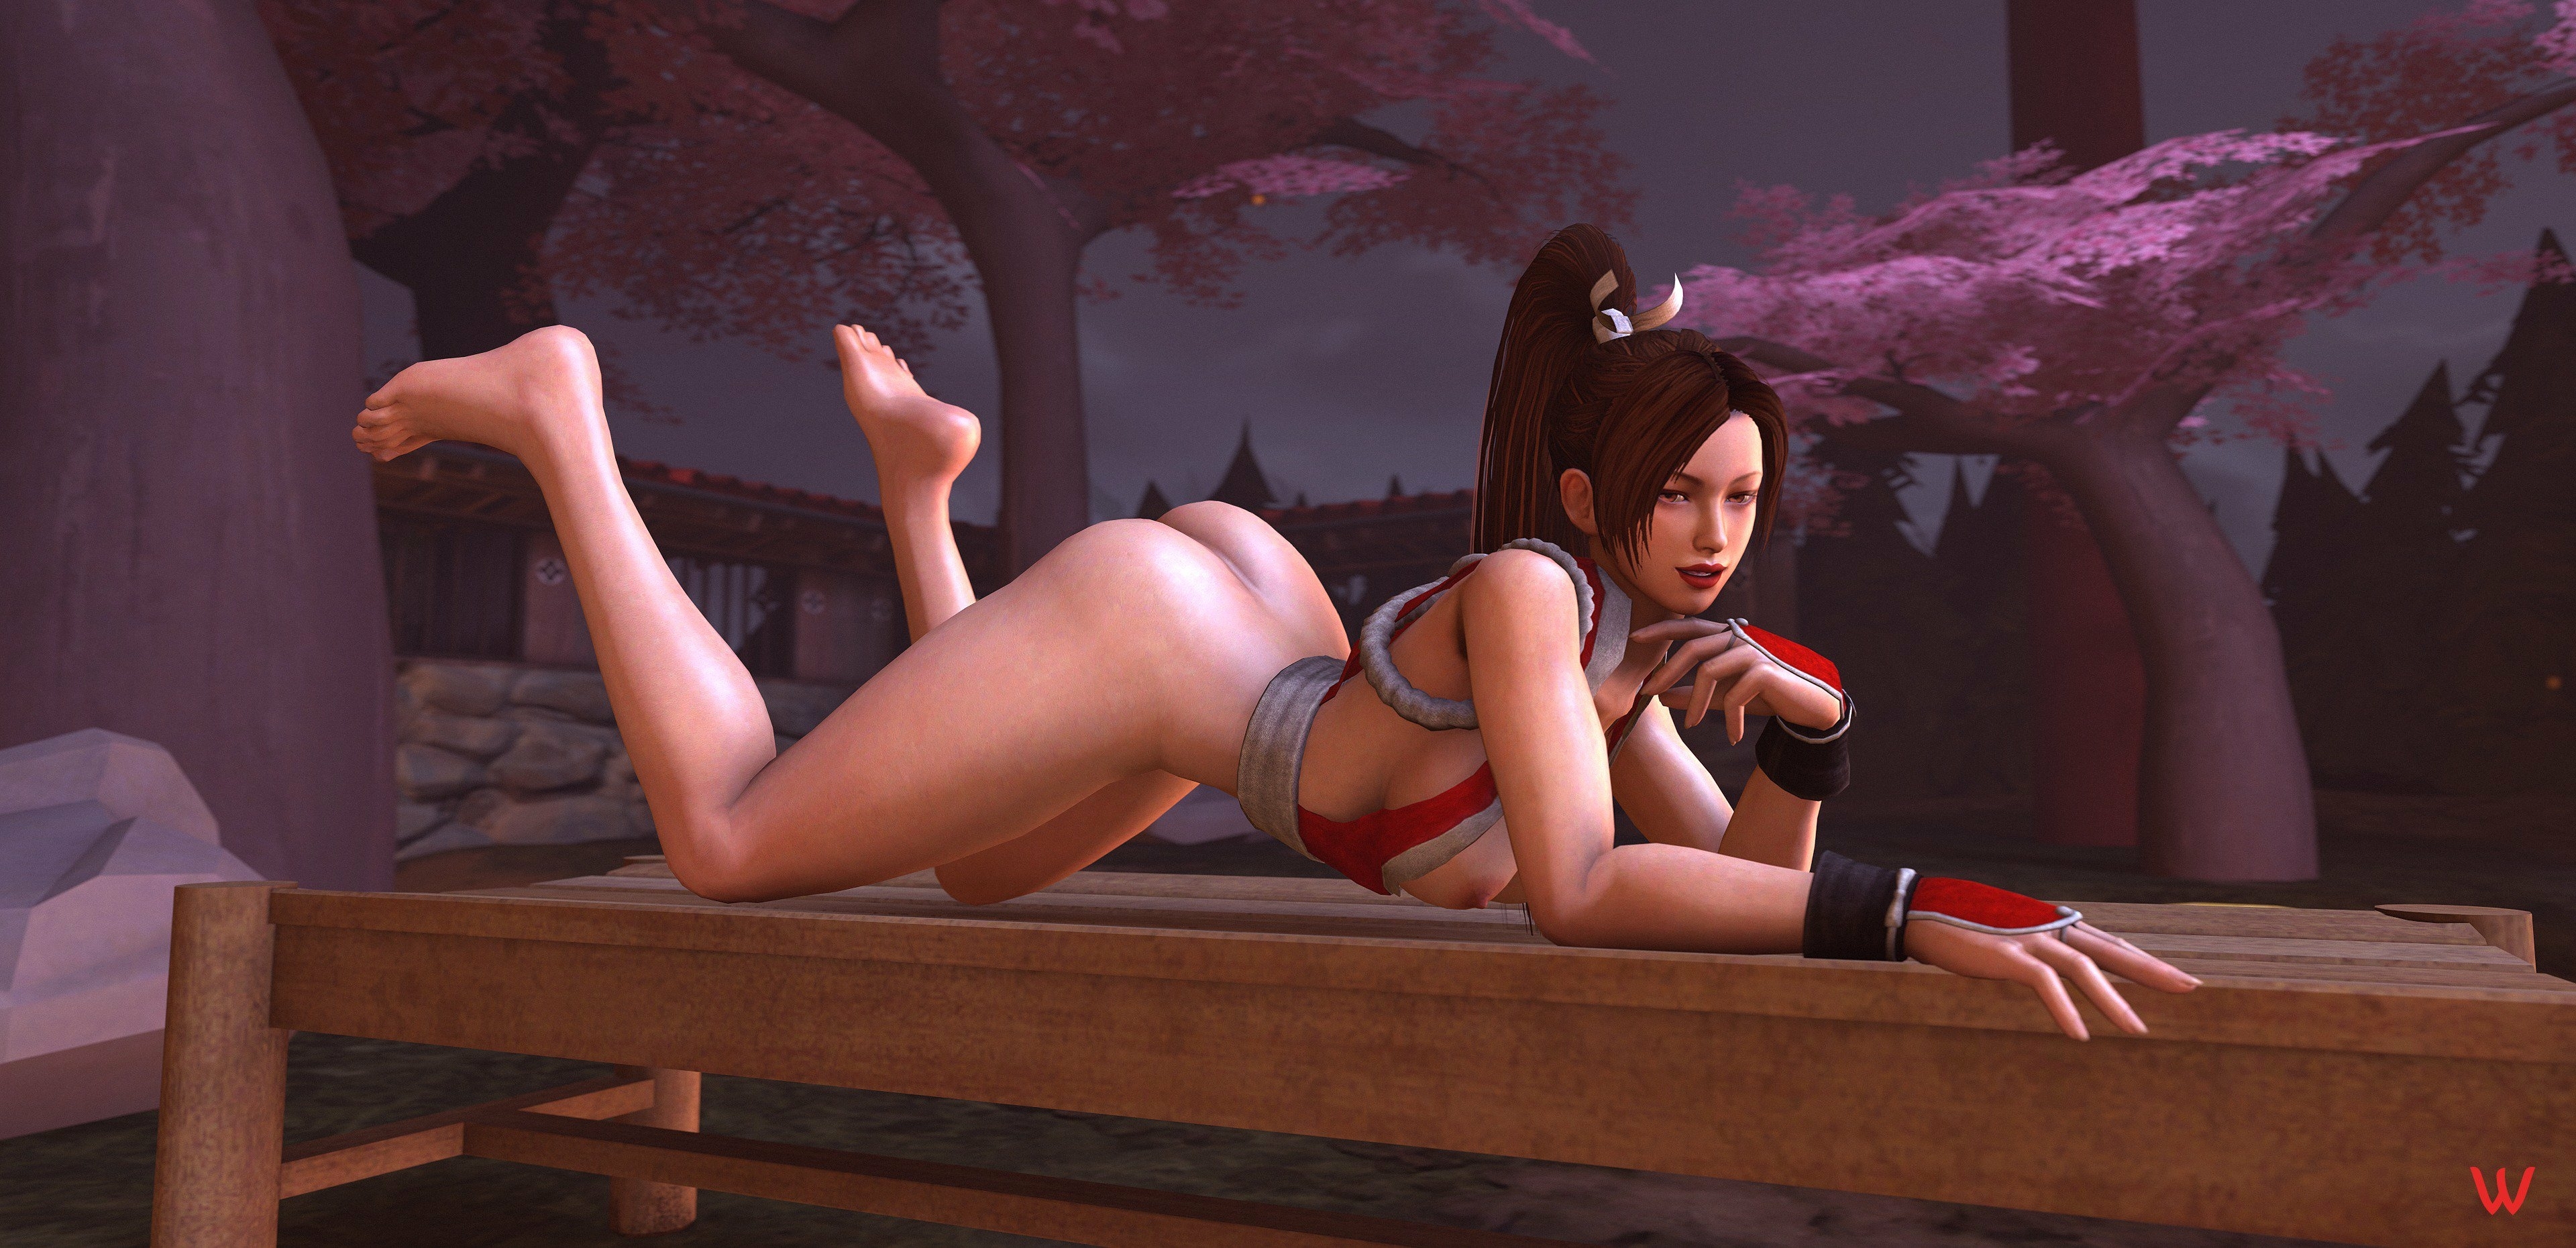 𝓓𝓲𝓭 𝓼𝓪𝓲𝓭 𝓘 𝓬𝓸𝓾𝓵𝓭𝓷 𝓽 𝓼𝓶𝓪𝓼𝓱 𝓲𝓷 𝓢𝓶𝓪𝓼𝓱  𝓱𝓸𝓷𝓮𝔂? 🍑 Mai Shiranui King Of Fighters Nipples Ass Boobs Big boobs Big Tits Sexy Horny Face Horny 3d Porn